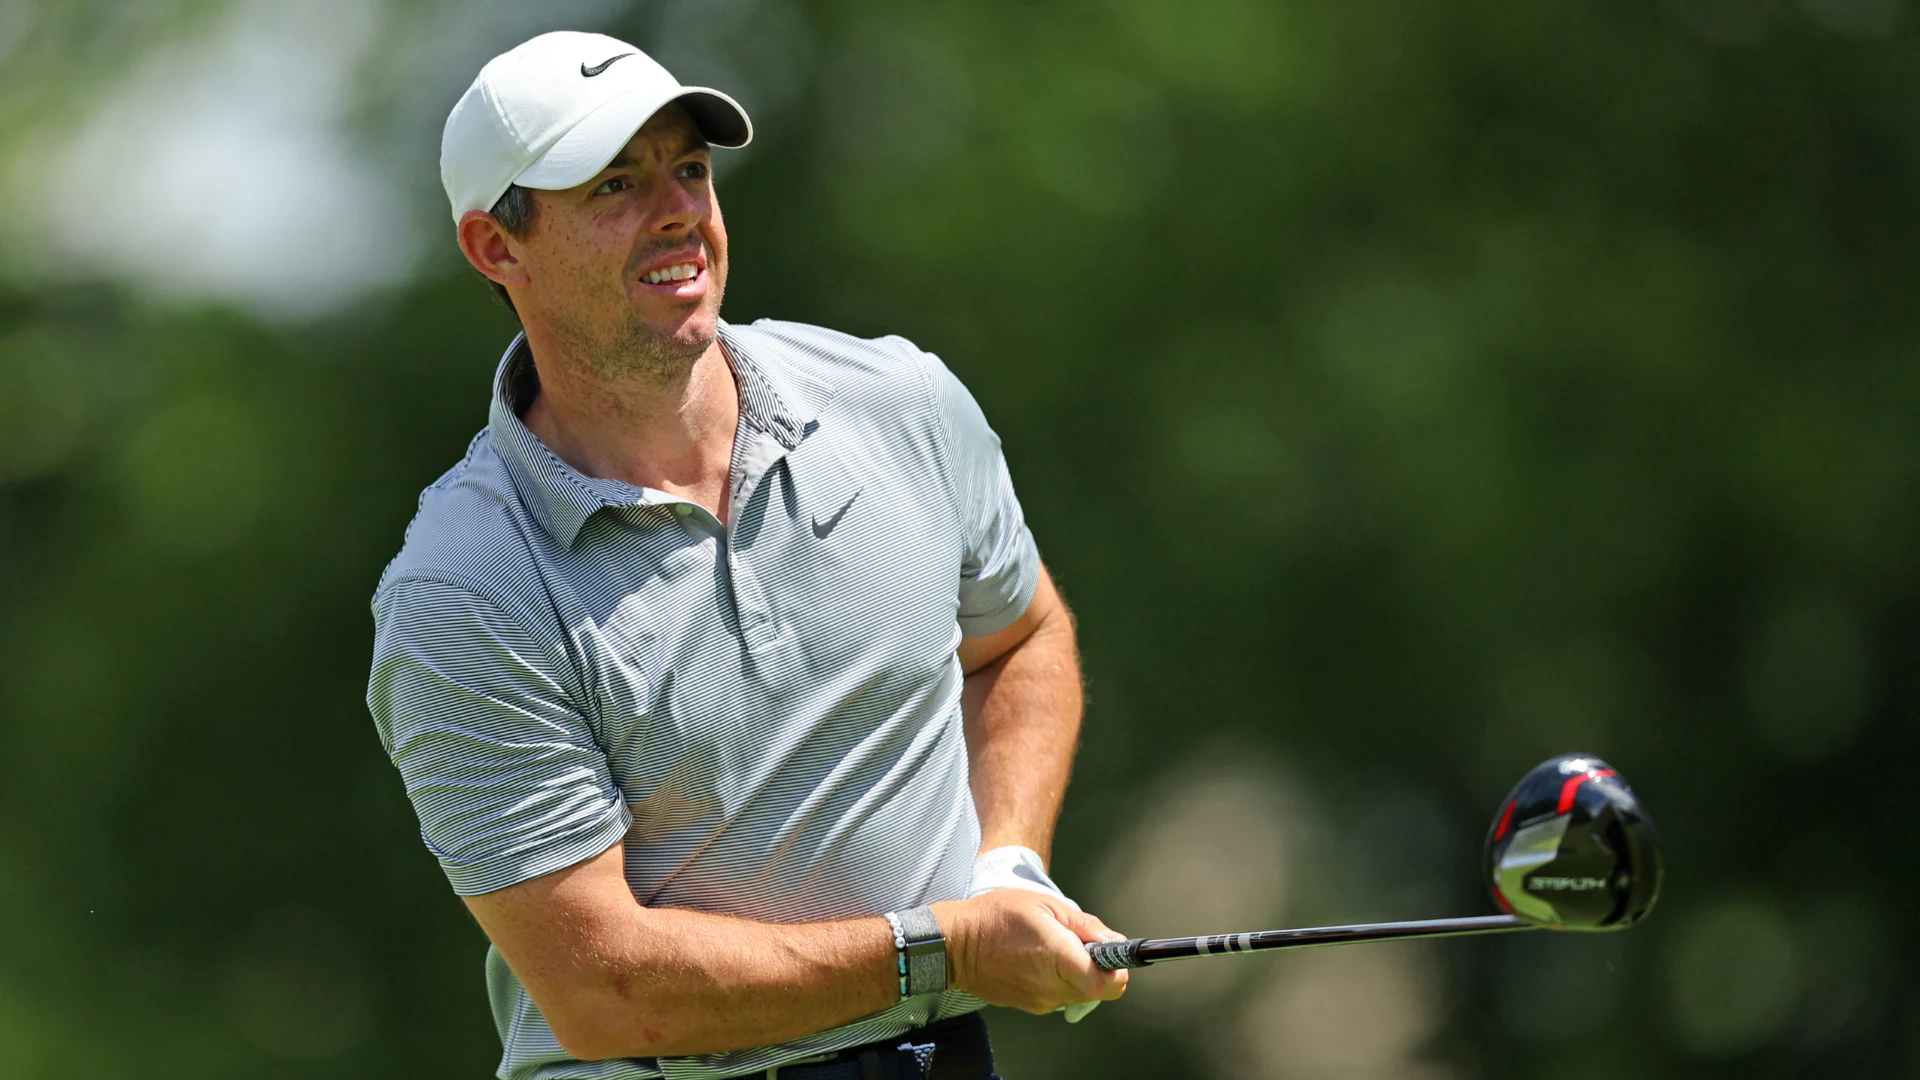 Rory McIlroy Calls for Talks Between Tours, LIV: ‘That Needs to Happen’